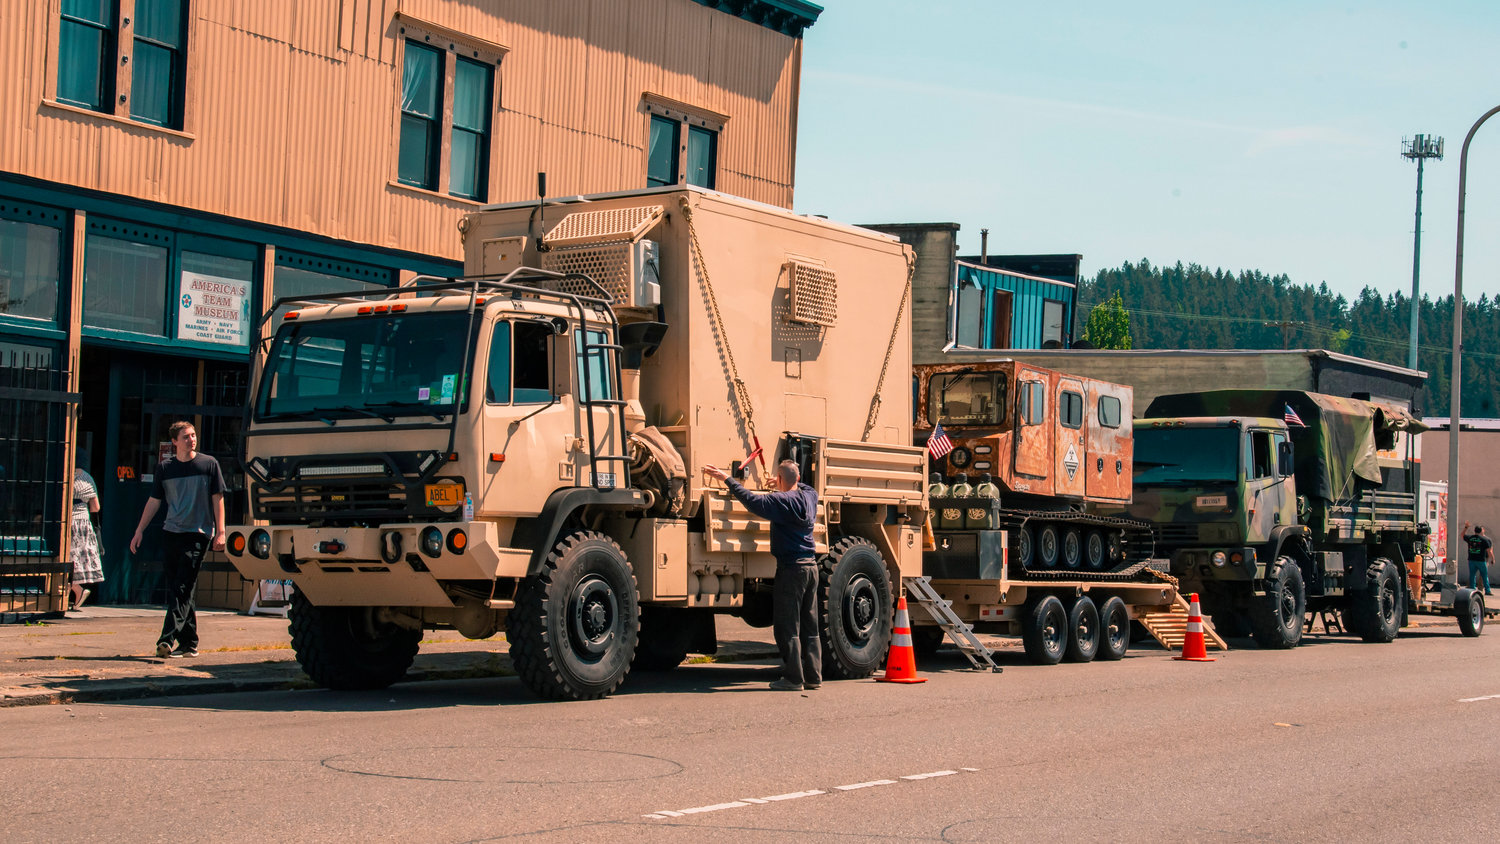 Military vehichles line North Tower Avenue during Armed Forces Day in Centralia on Saturday.